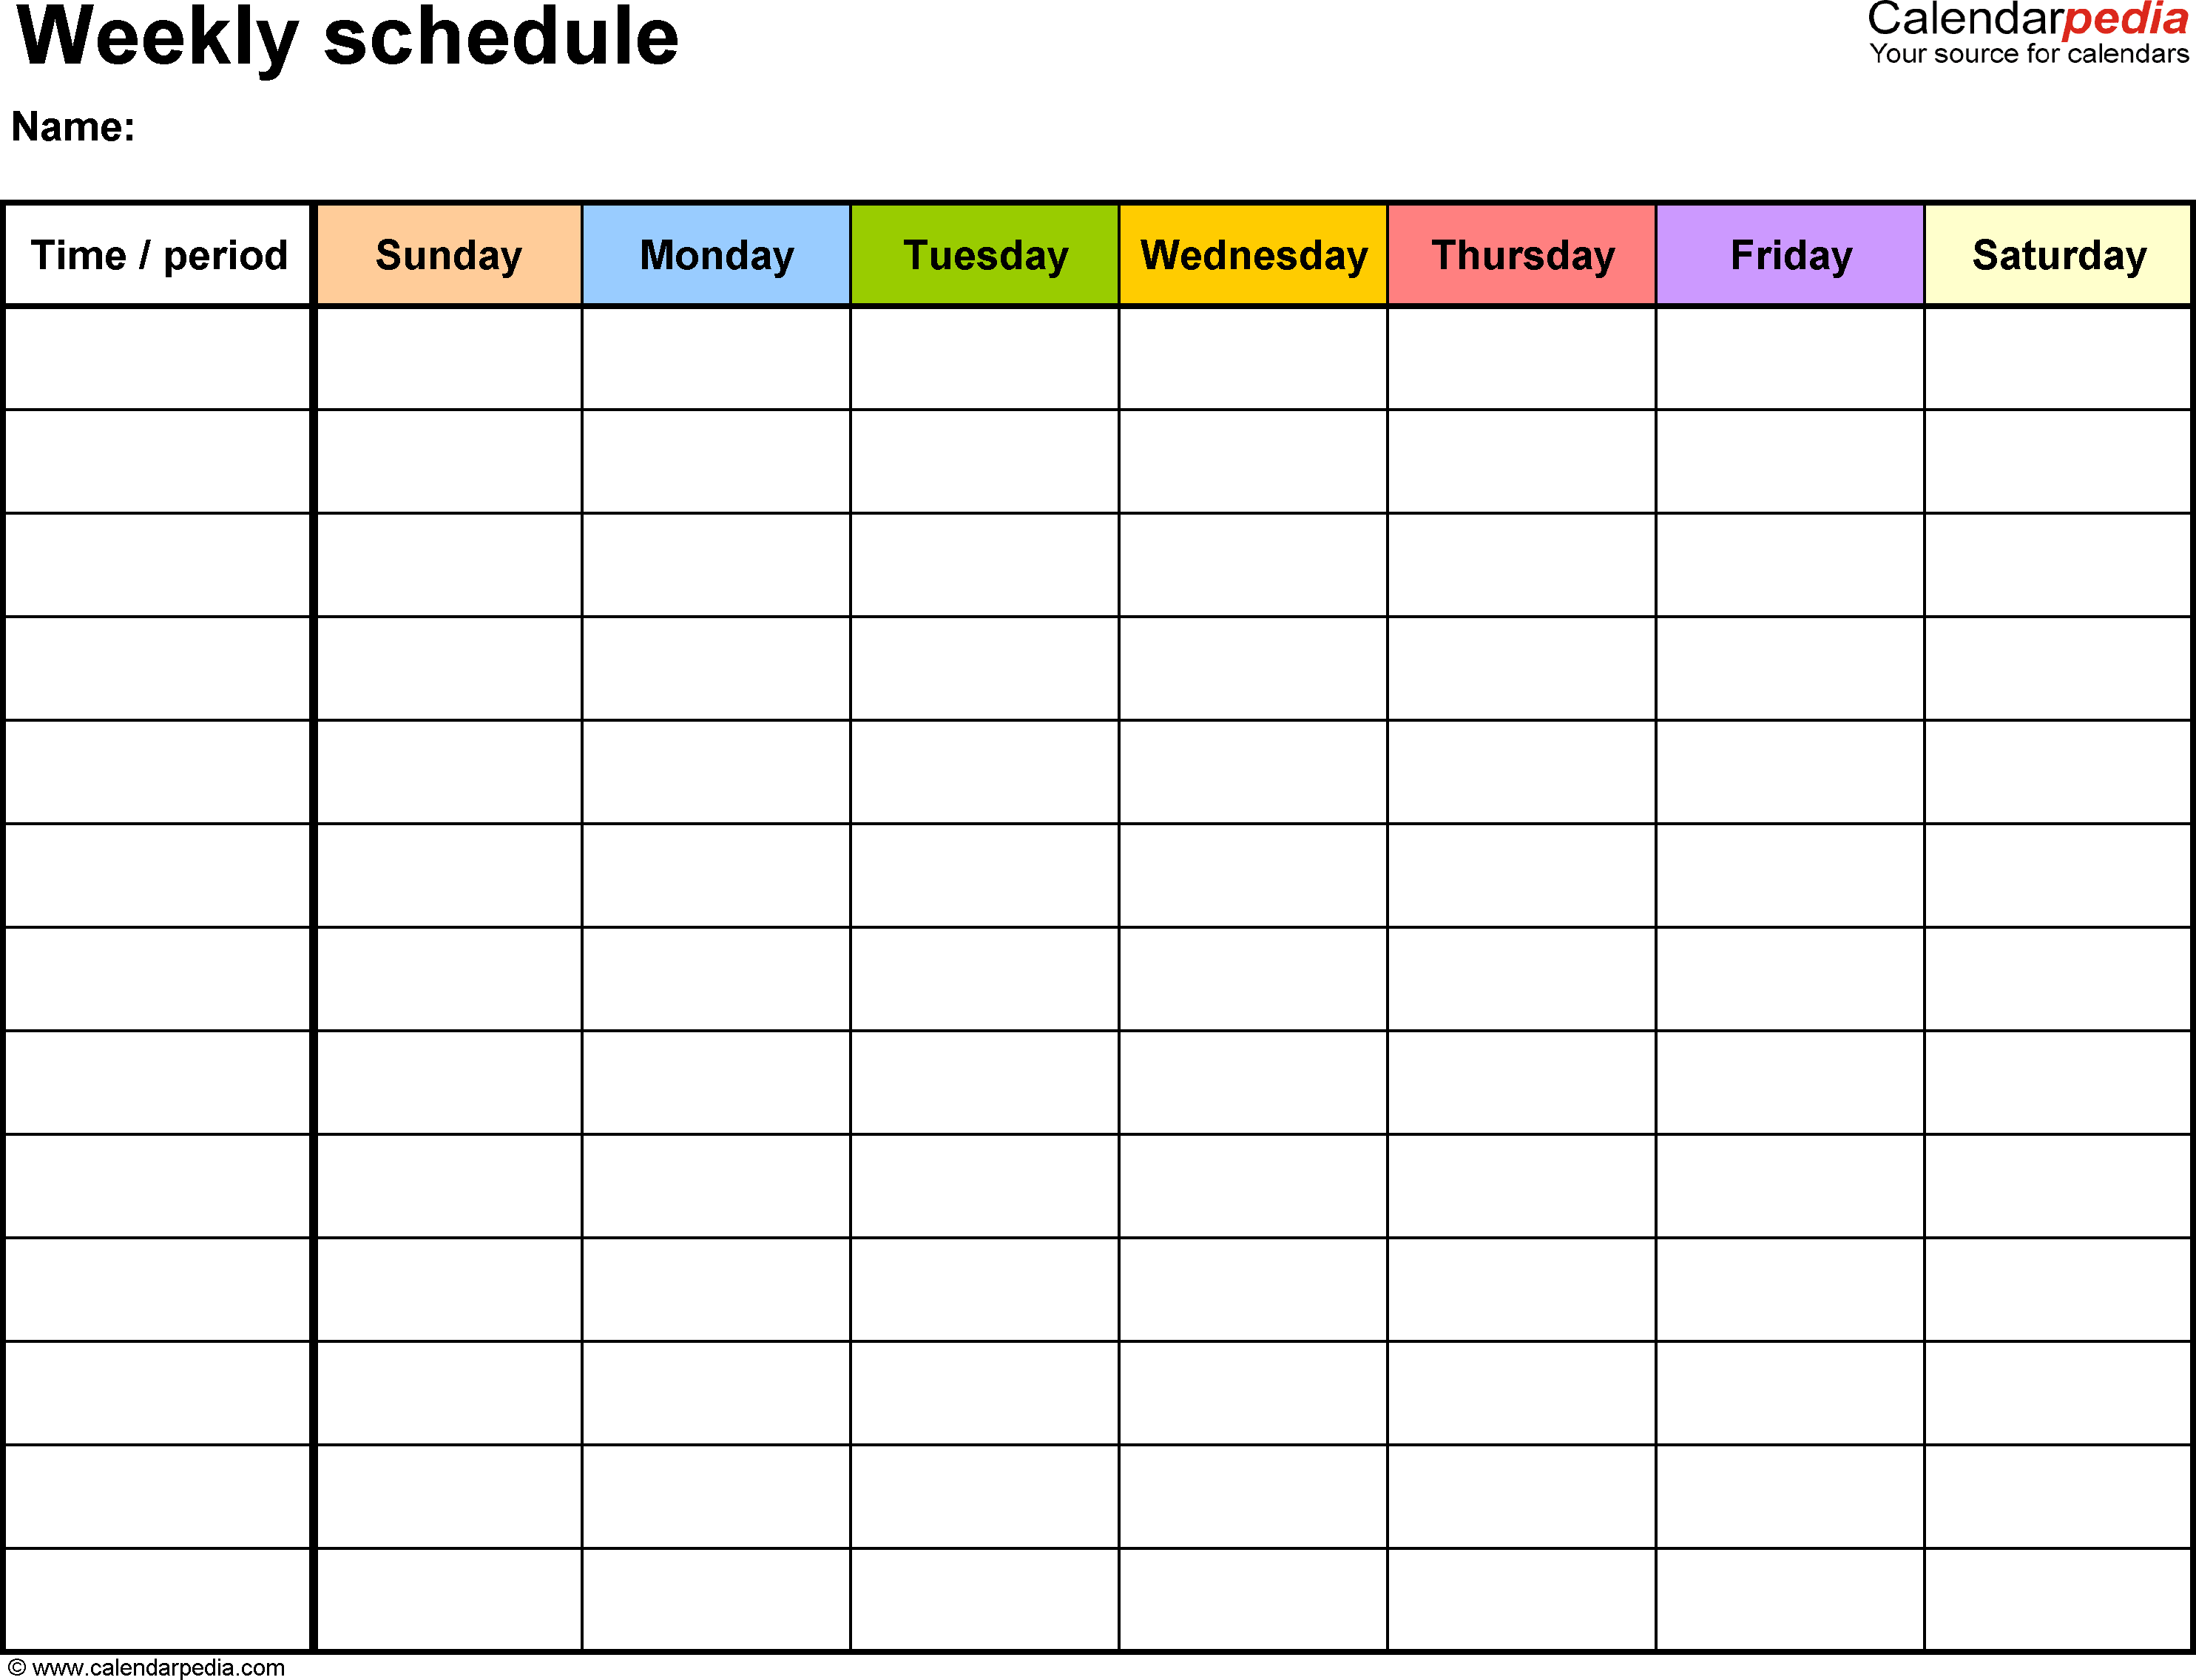 weekly-calendar-with-time-slots-template